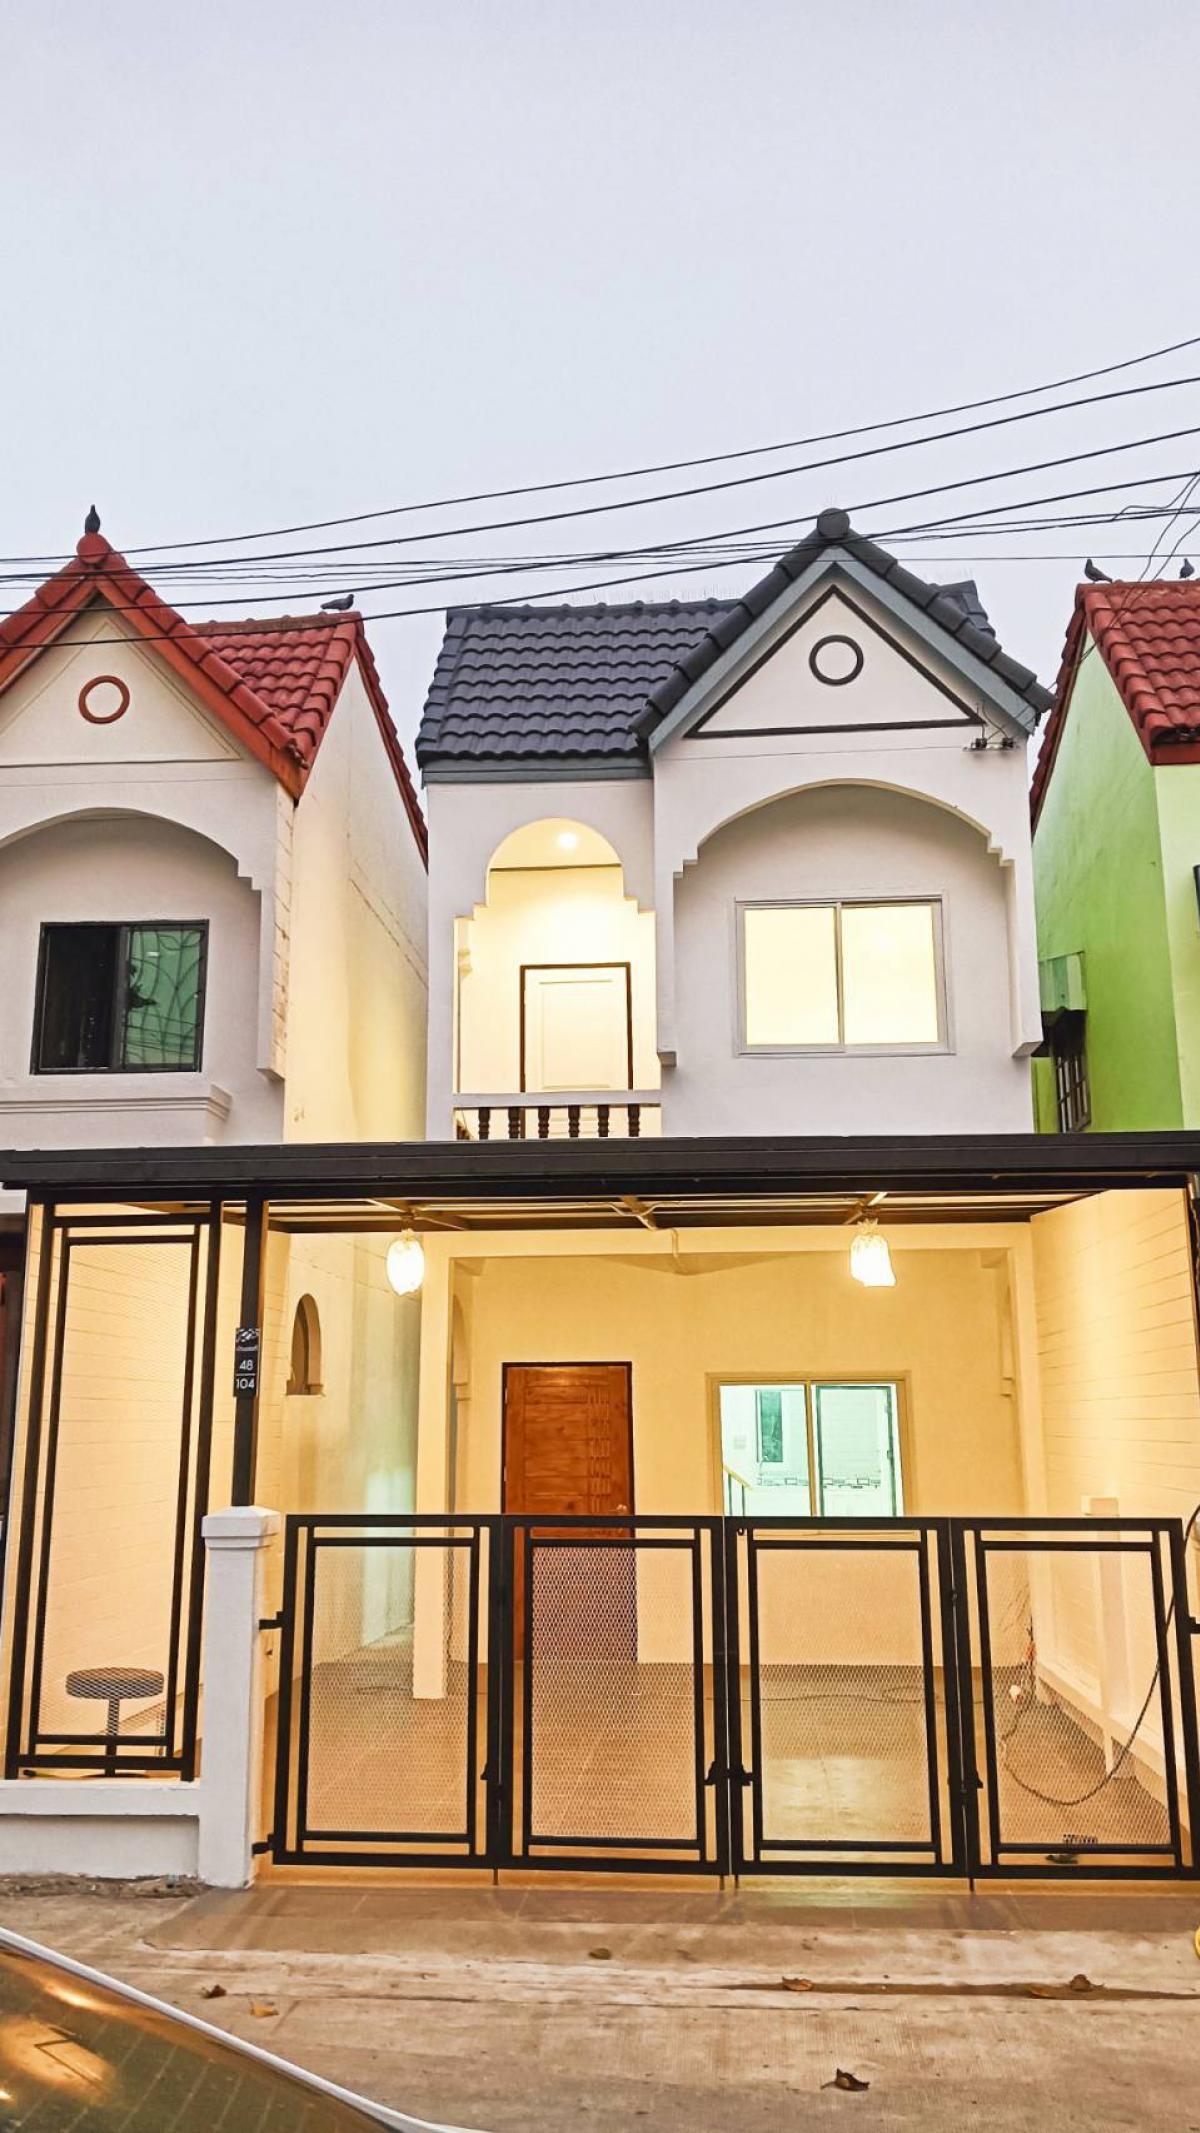 For SaleTownhouseMin Buri, Romklao : For sale (co-agent accepted) townhouse/townhome lower than market price Separated independent wall from neighbors, 2 floors (2 bedrooms, 2 bathrooms), 20 square wah, good location in Nong Chok, Sangkha Santisuk 32.